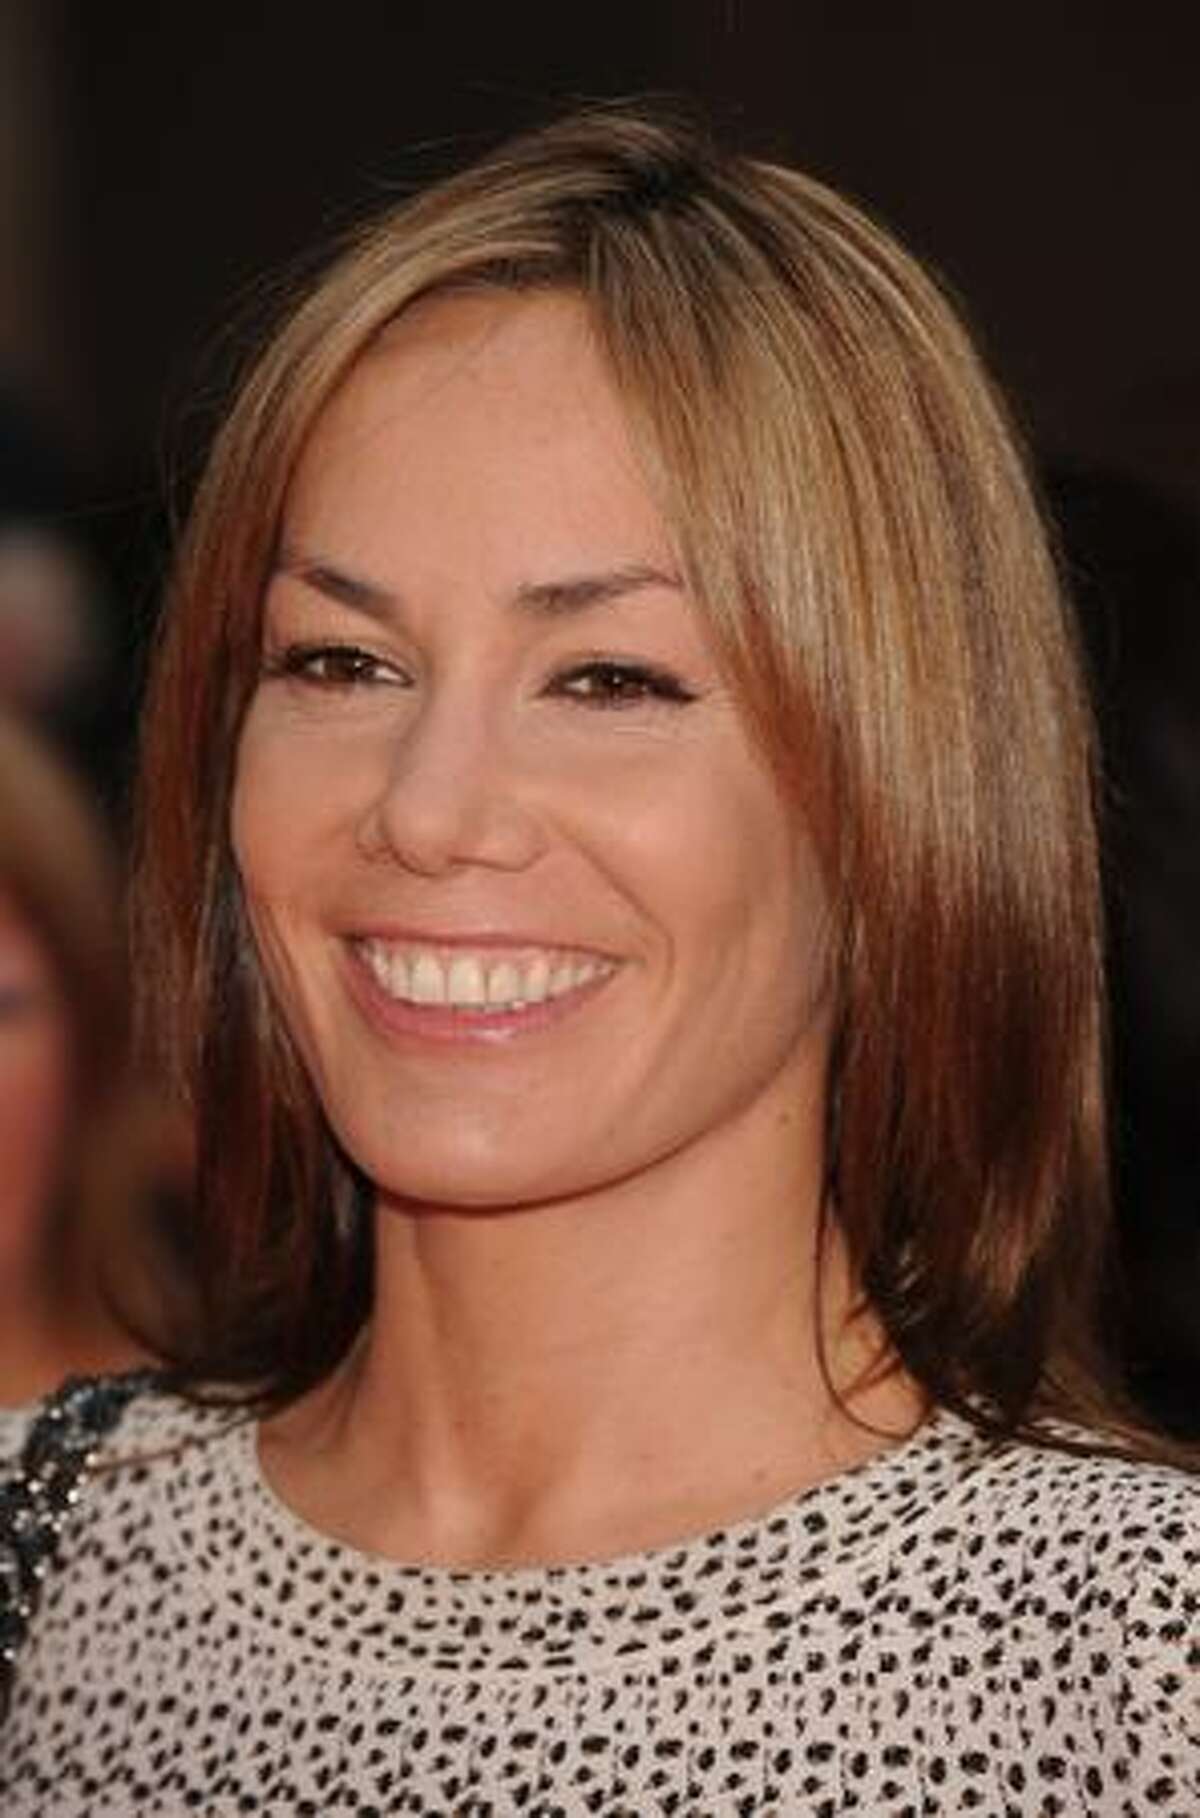 Tara Palmer Tomkinson attends the Pride of Britain Awards at the Grosvenor House Hotel on Monday in London, England.